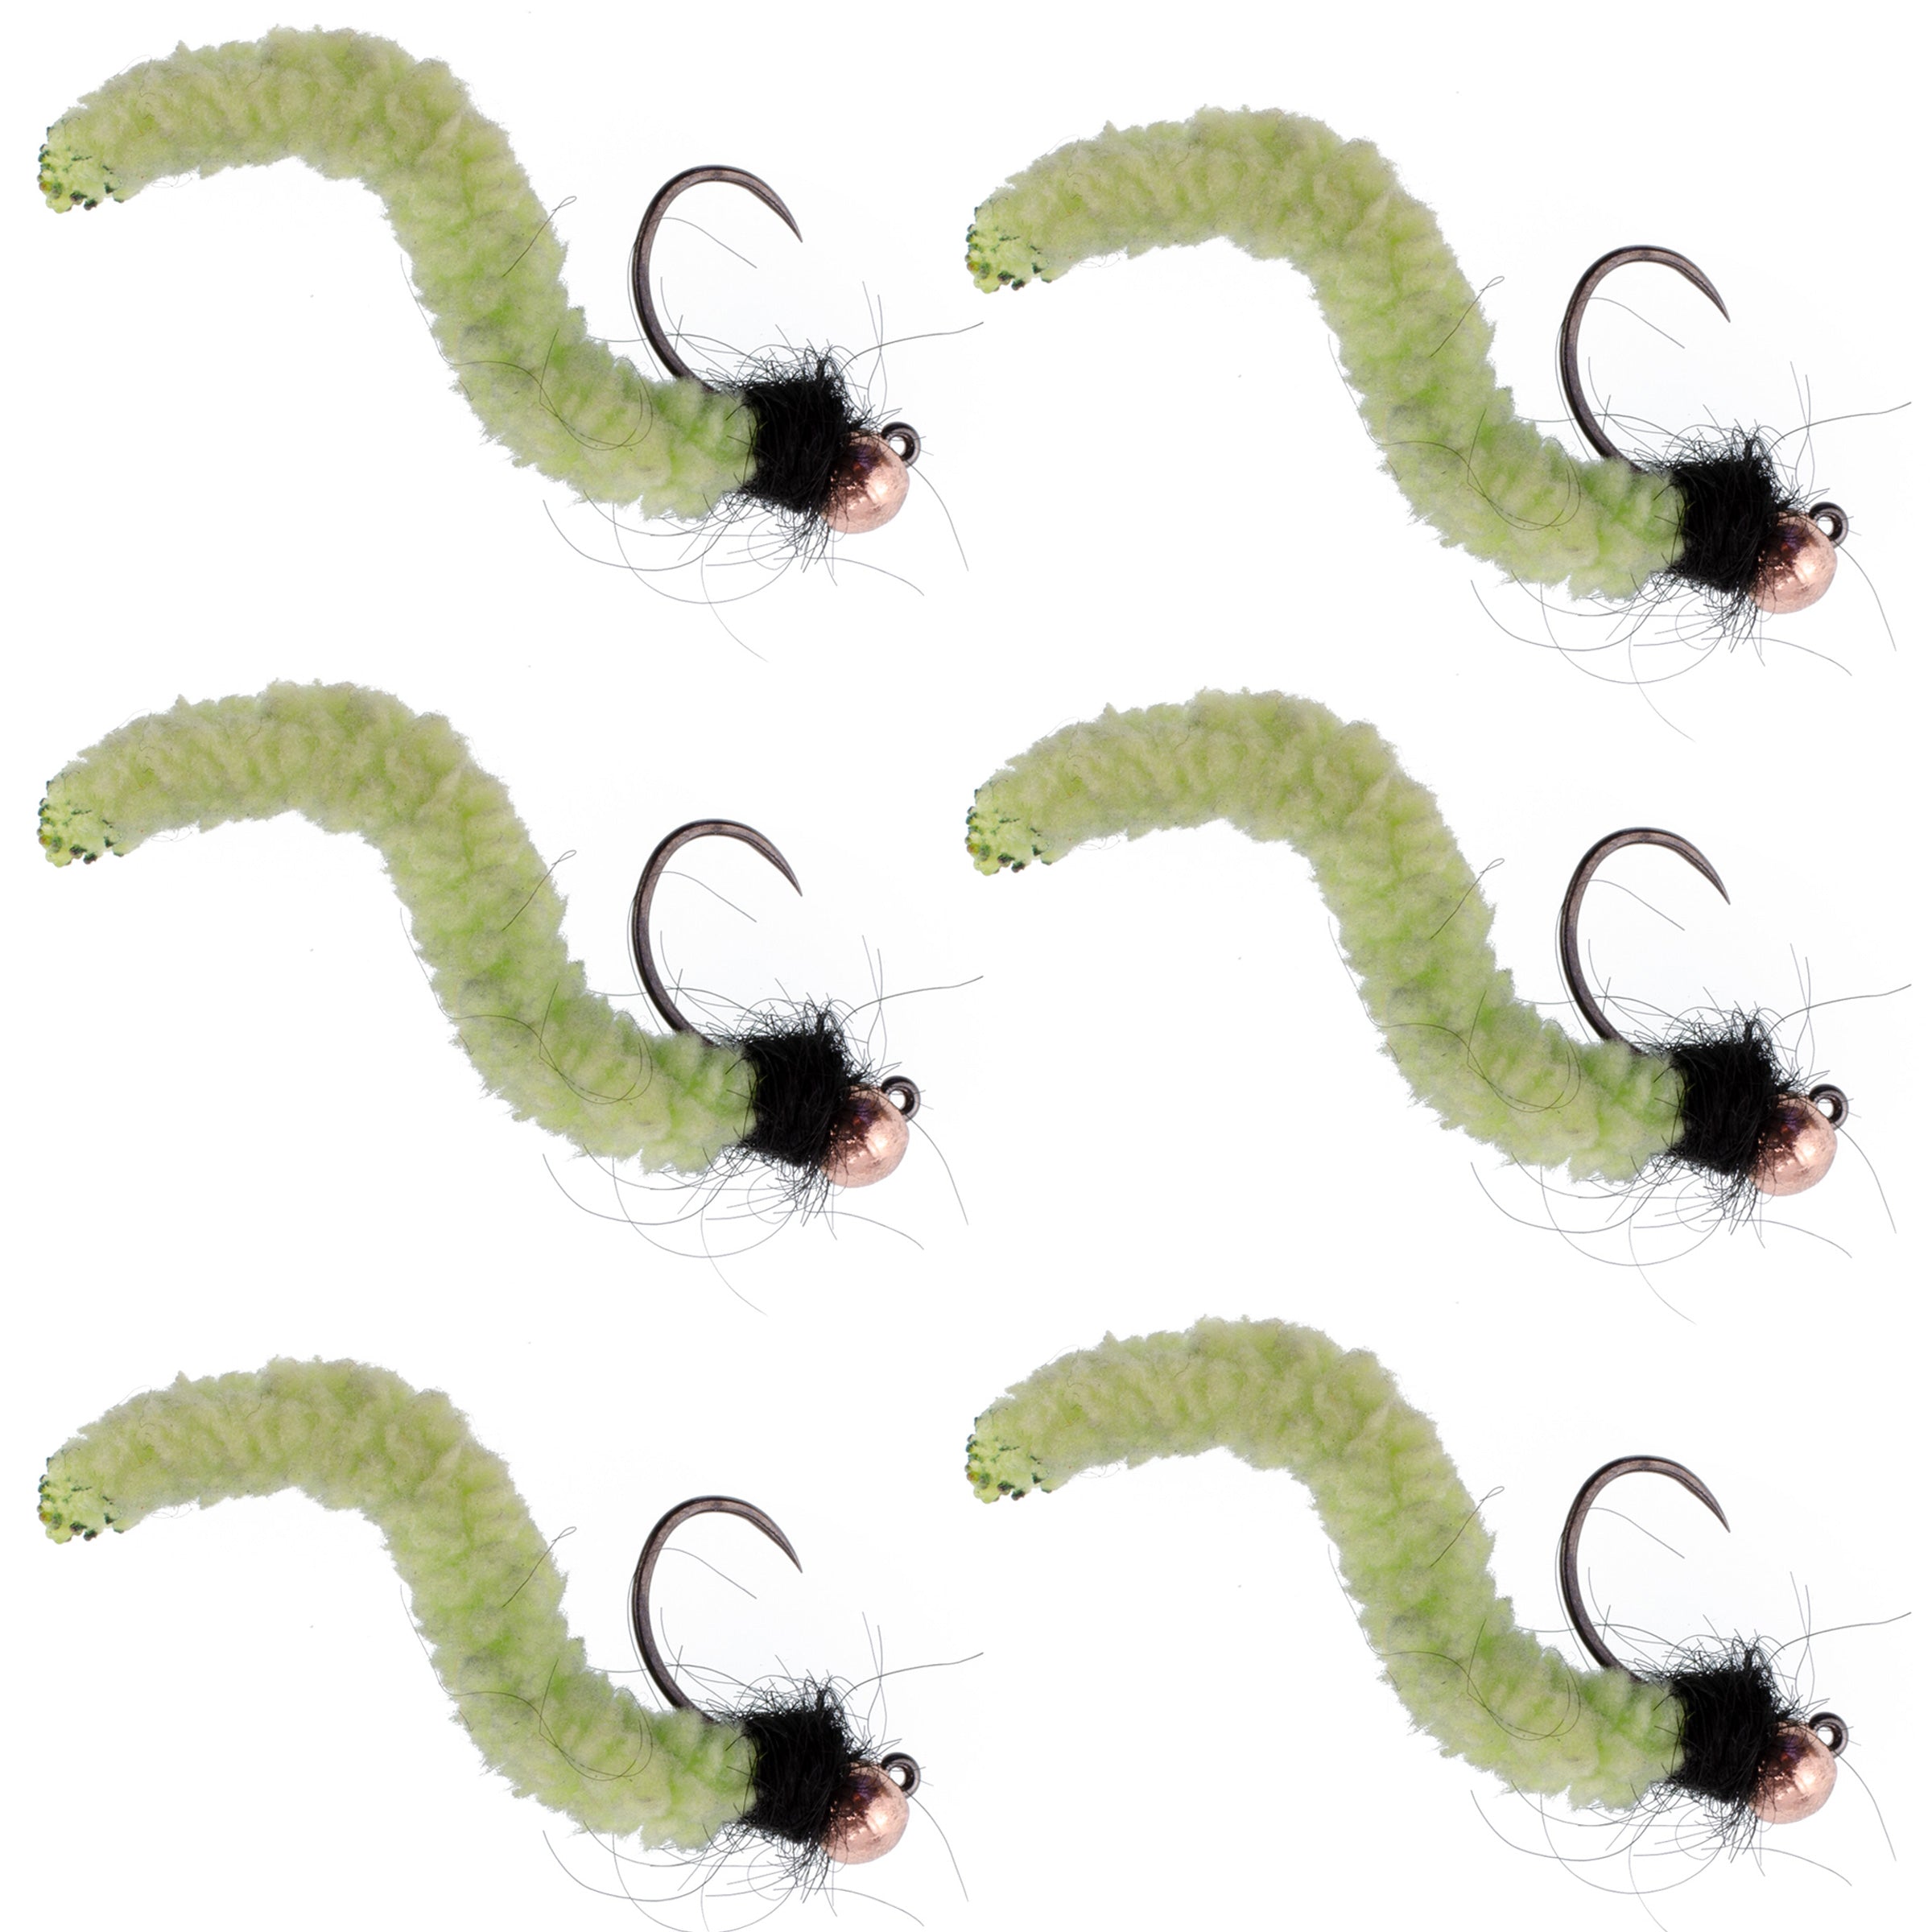 Tungsten Bead Chartreuse Wormy Mop Fly Tactical Jig Czech Euro Nymph Barbless Fly - 6 Flies Size 14